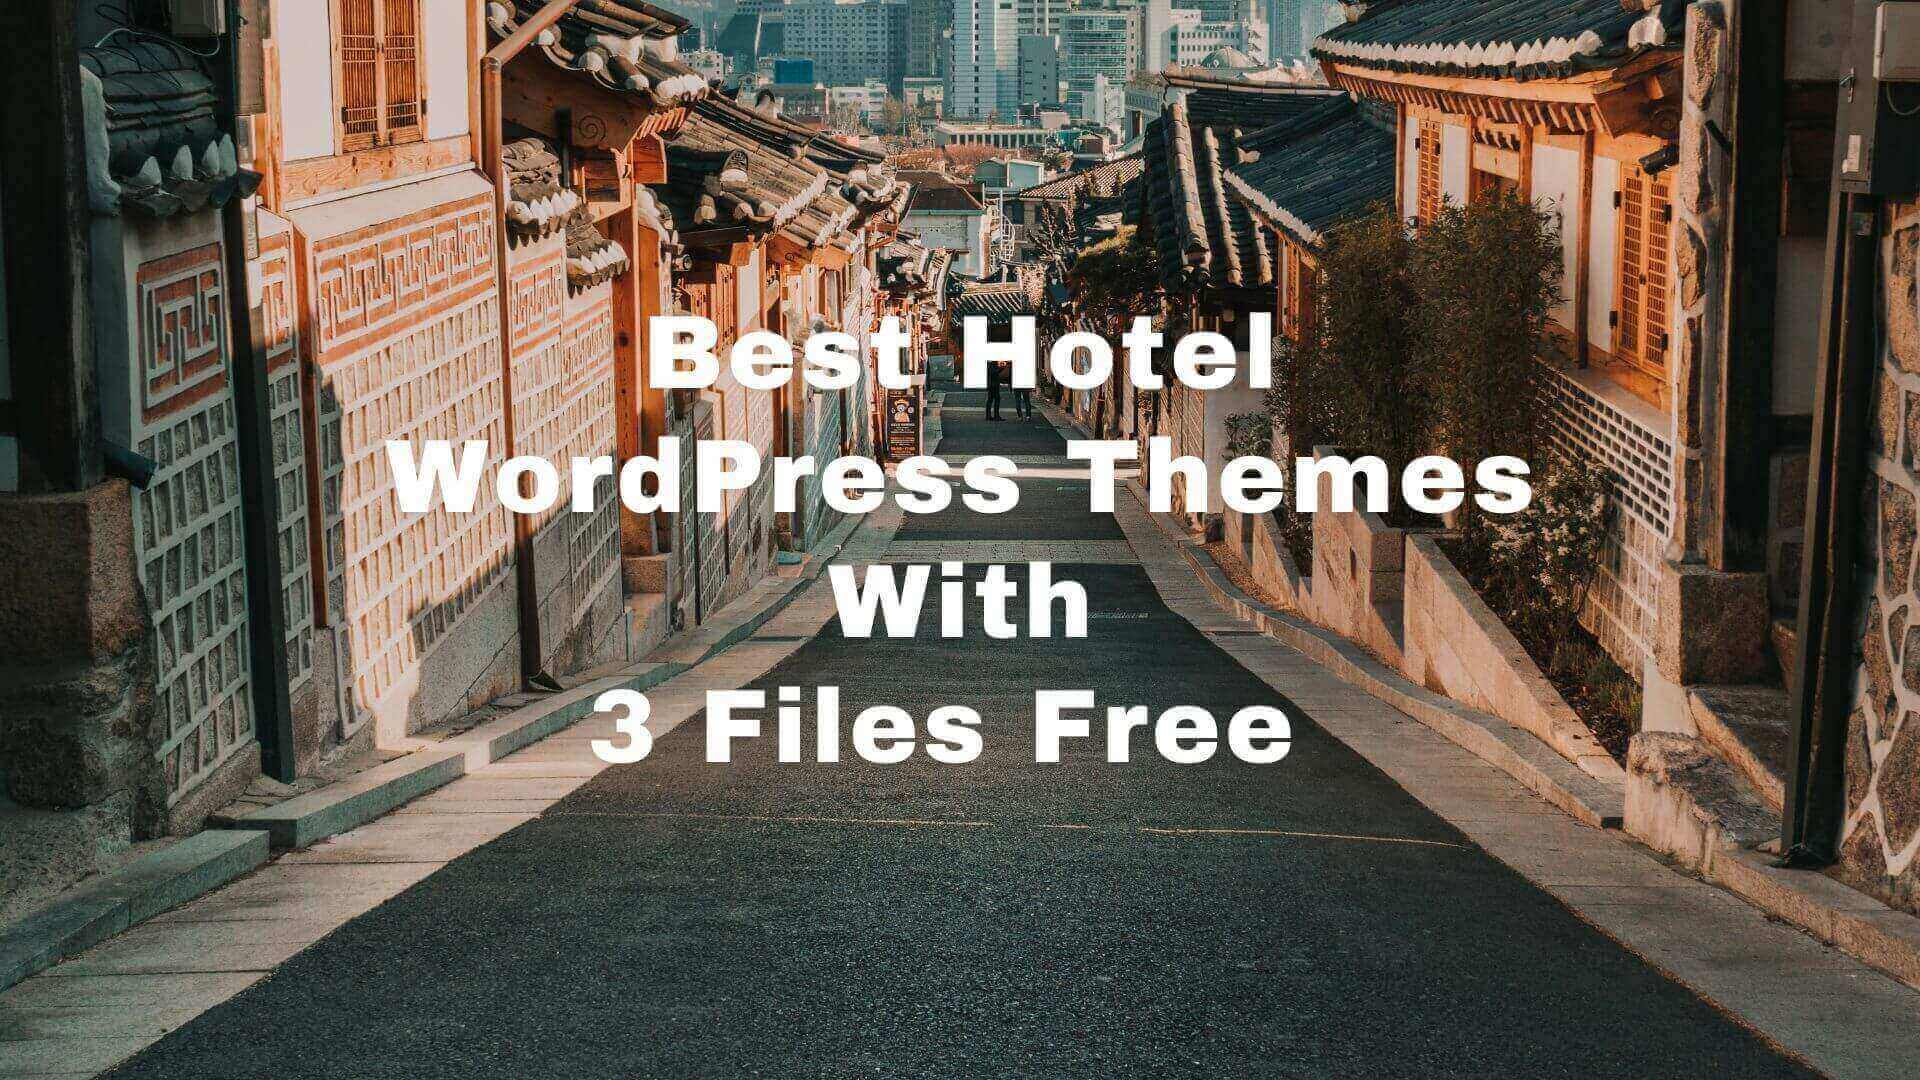 5 Best Hotel WordPress Themes With 3 Files Free